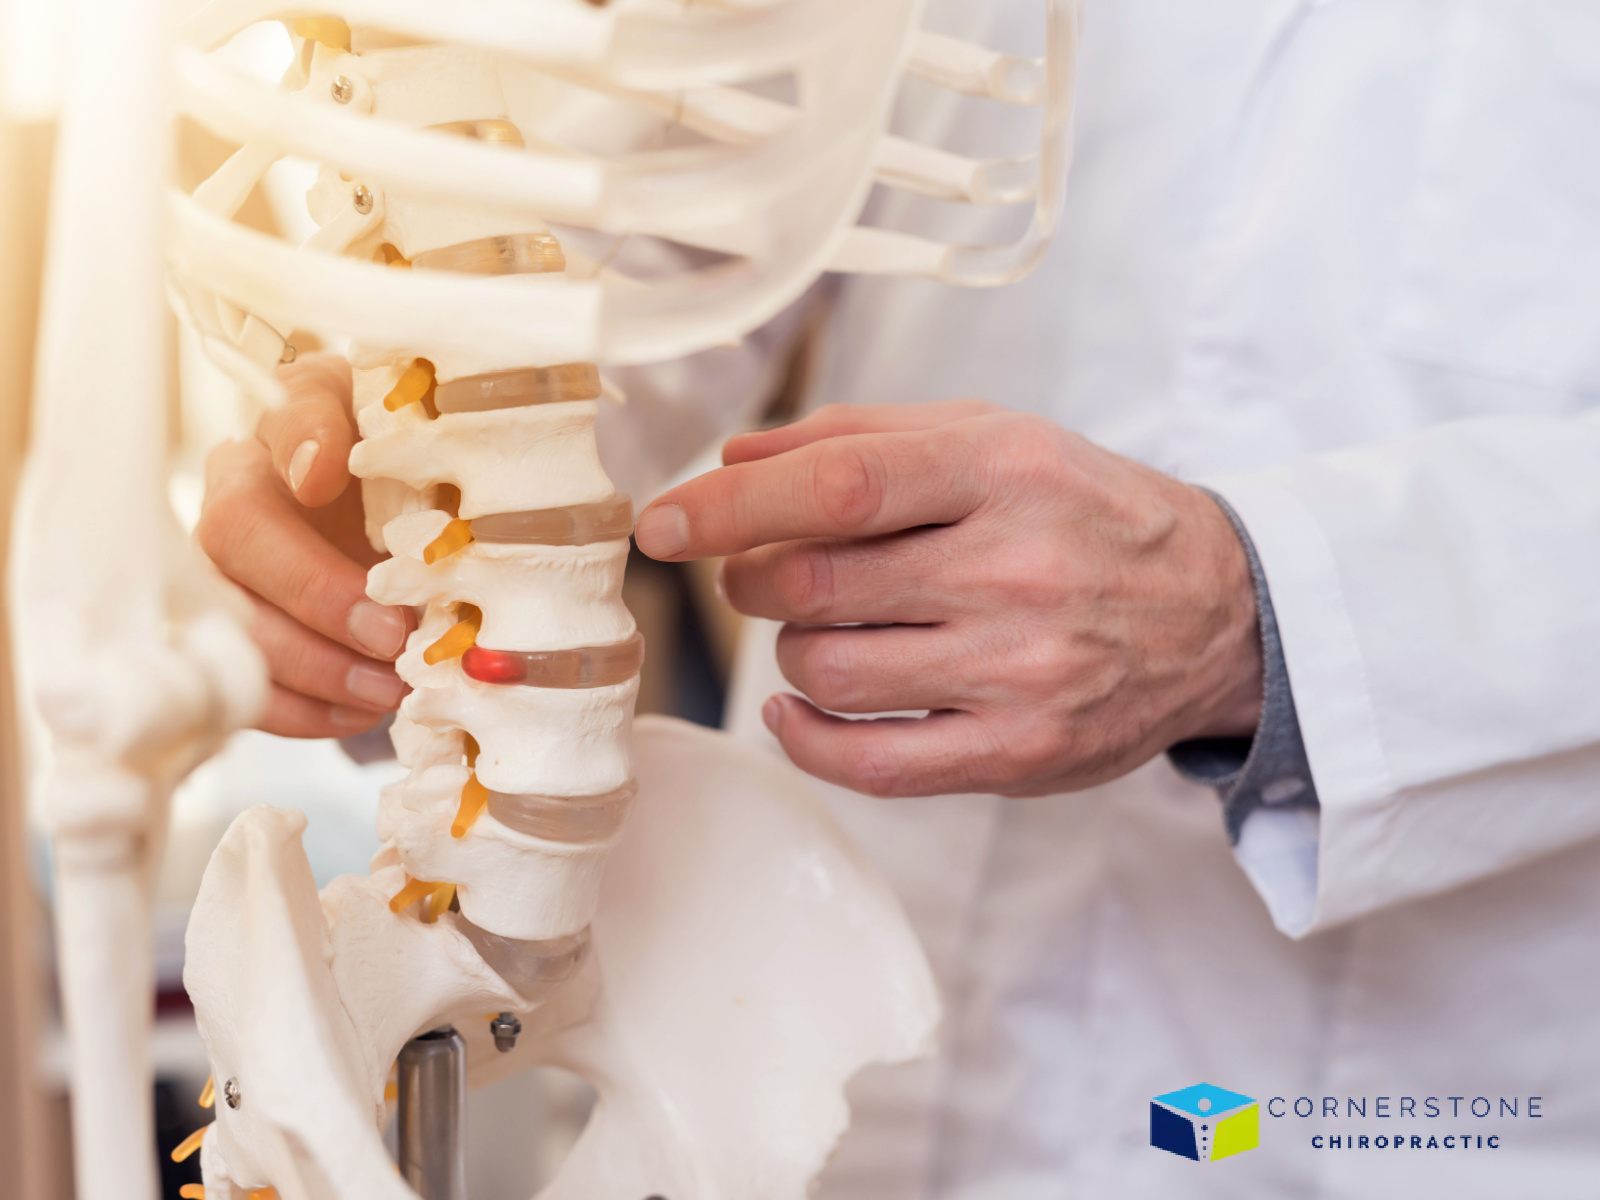 What to Expect During Your Chiropractic Adjustment